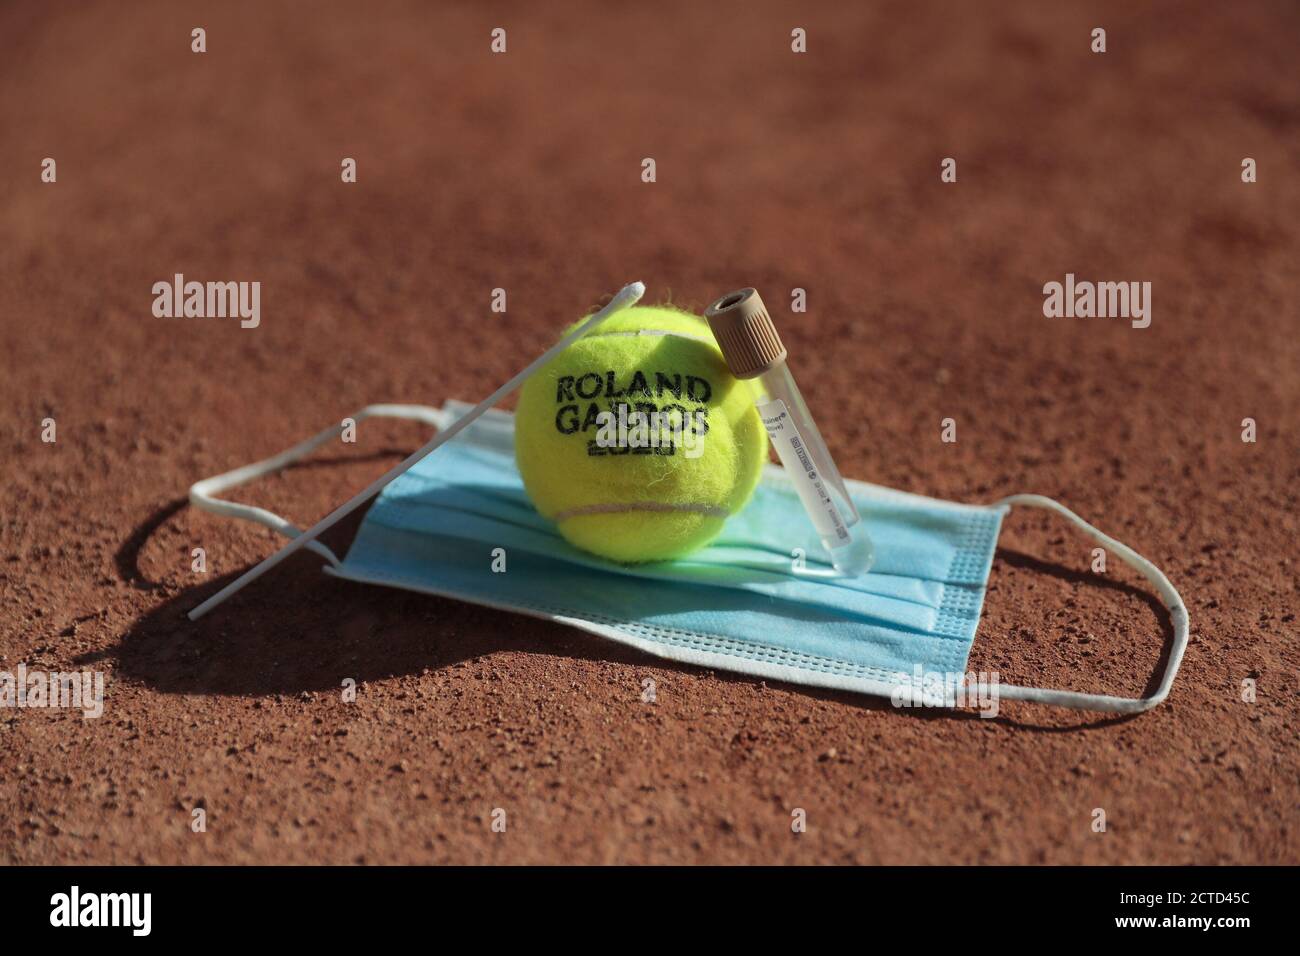 Illustration of official tennis ball Roland Garros 2020 by Wilson on the clay of Philippe Chatrier court over protector mask with swab sample with tub Stock Photo